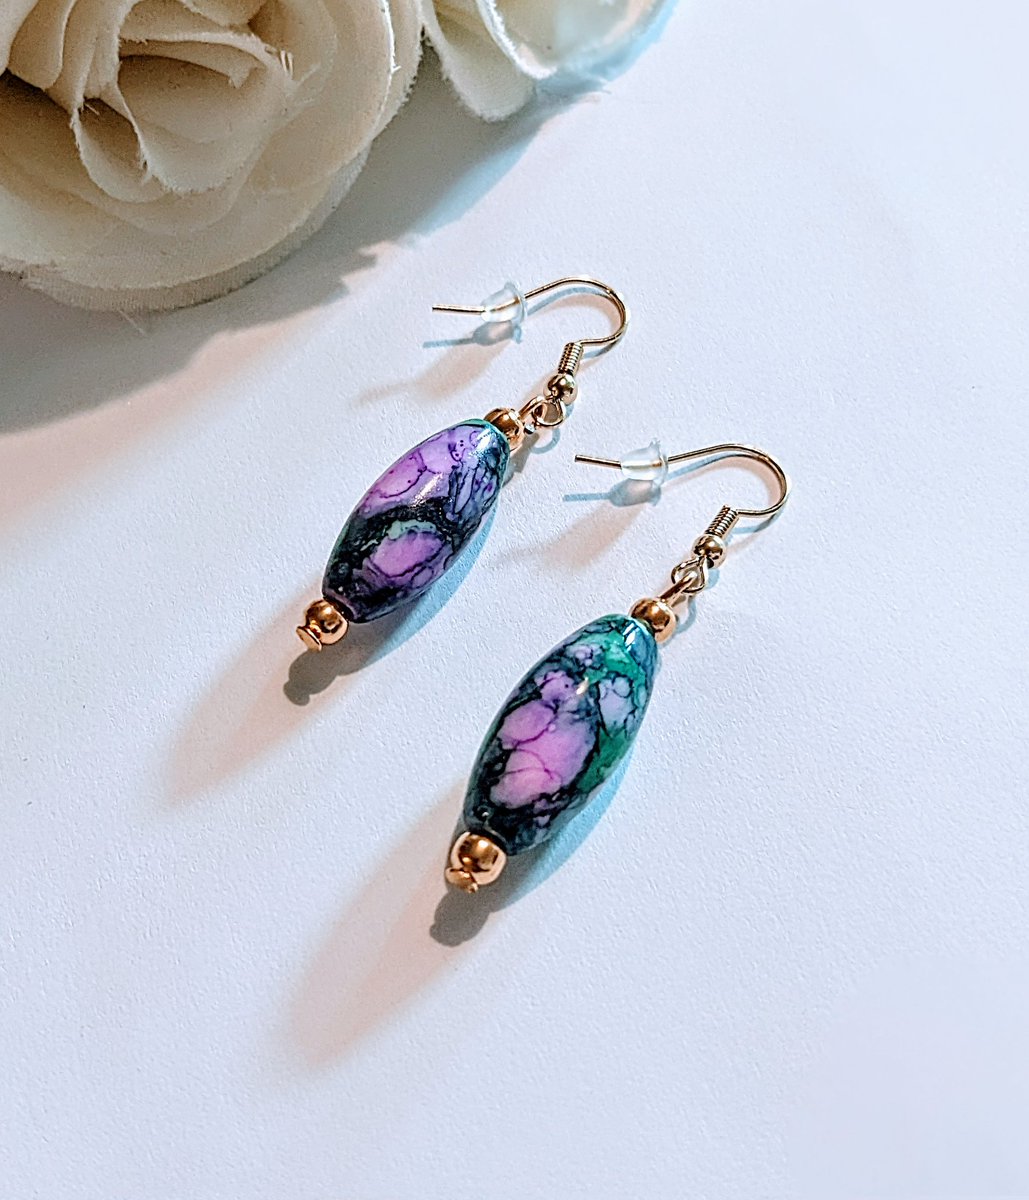 #handmade purple and green marble beaded earrings. 18k Gold filled.
Other colour options.
Available here ⬇️
kelliesuedesigns.etsy.com/listing/126353…
.
#EarlyBiz #EarlyRisers #jewelryaddict #etsy #MHHSBD #giftideas #stockingstuffers #shopping #elevenseshour